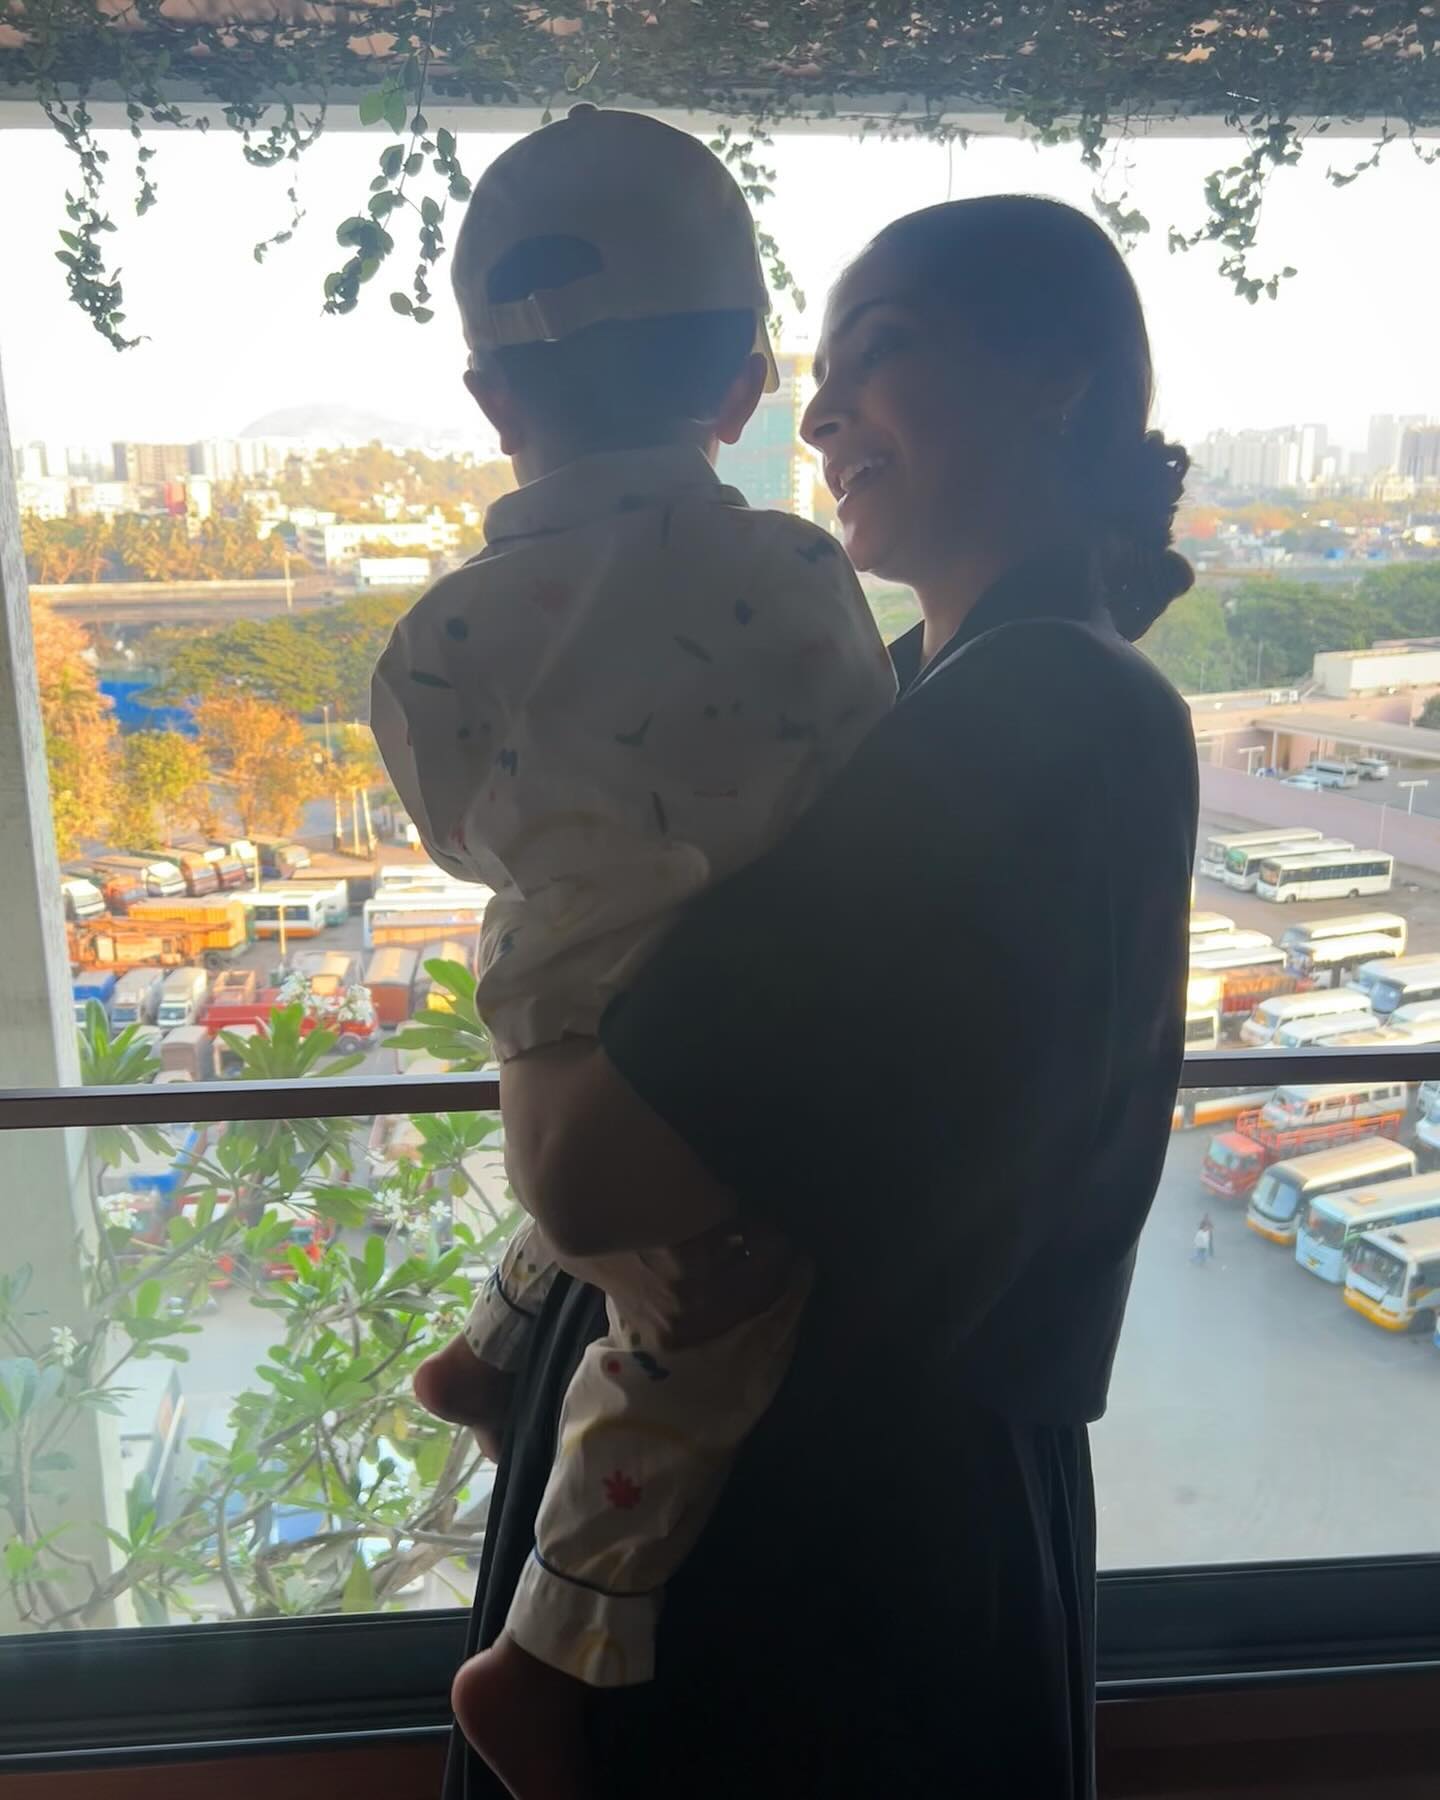 Sonam Kapoor seems to do a little chat with her son